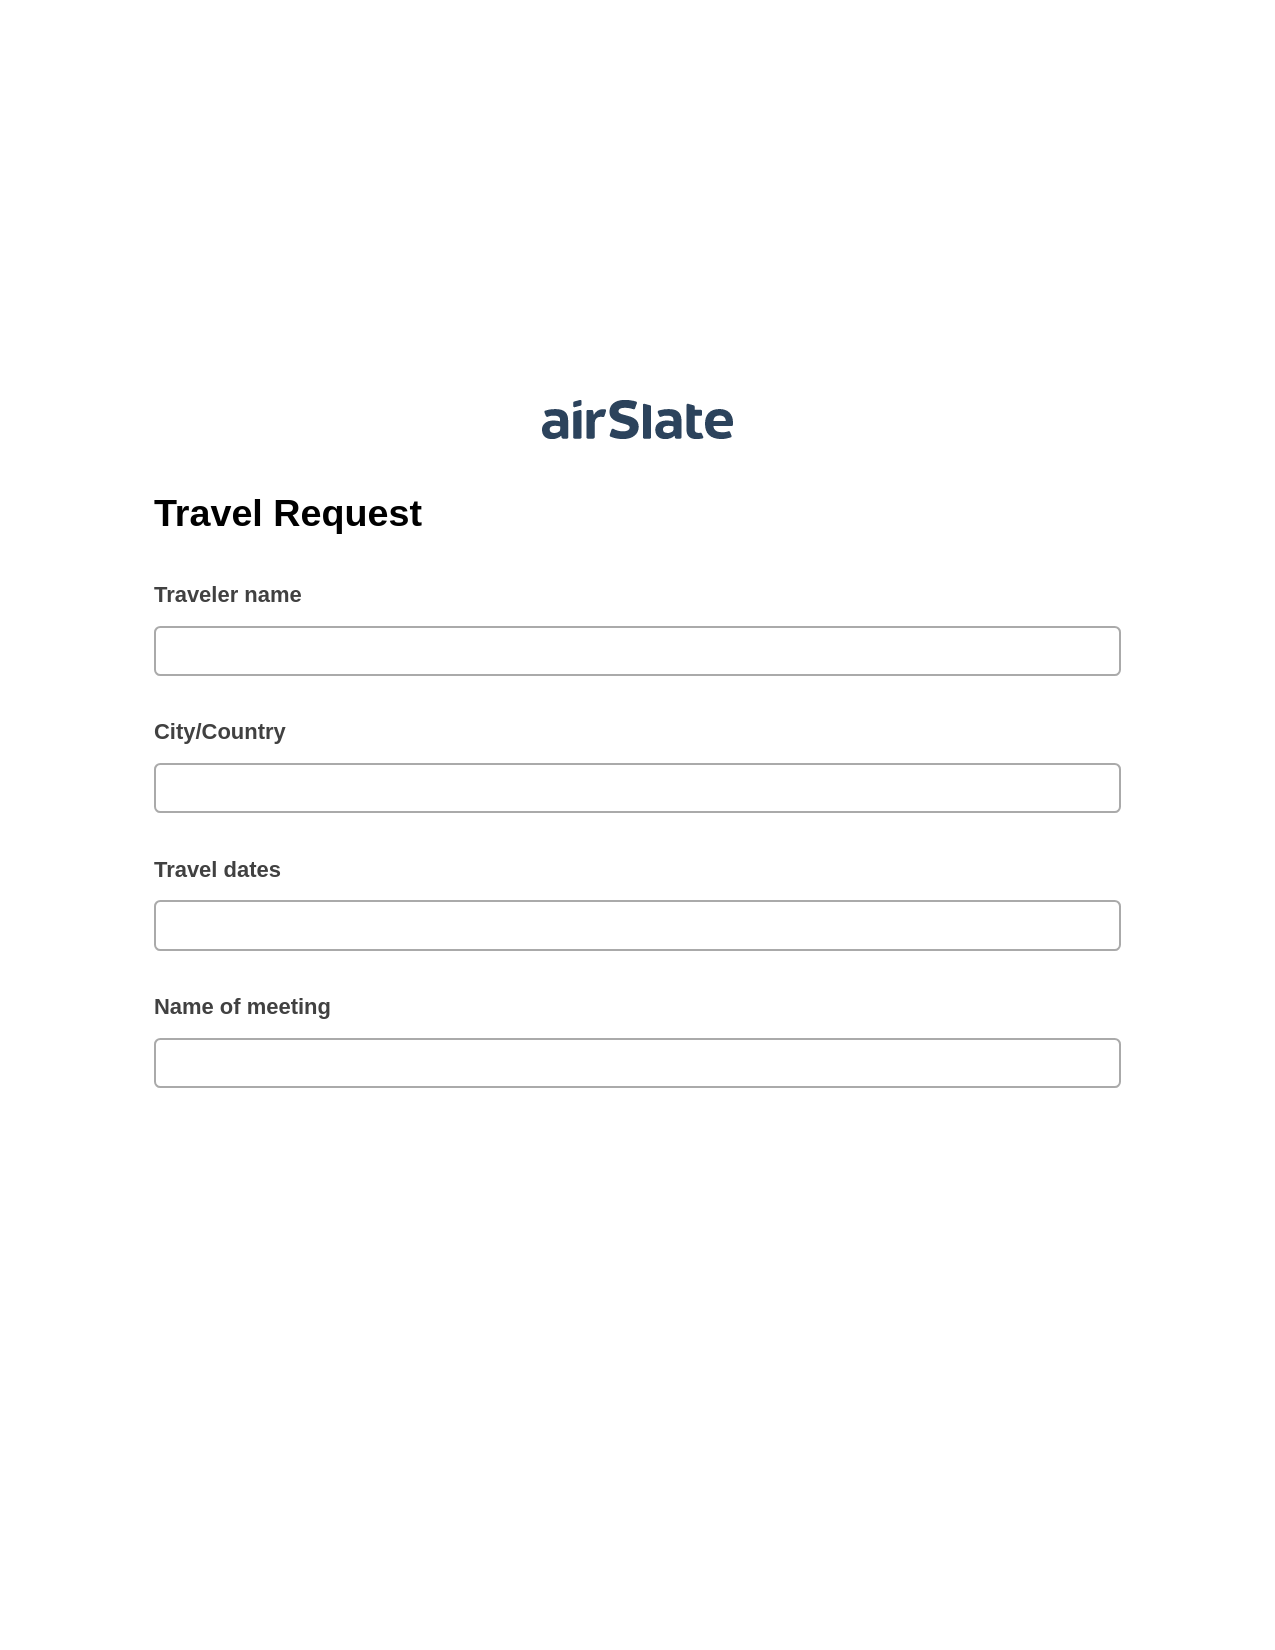 Travel Request Pre-fill Dropdown from Airtable, Lock the slate bot, Export to Excel 365 Bot